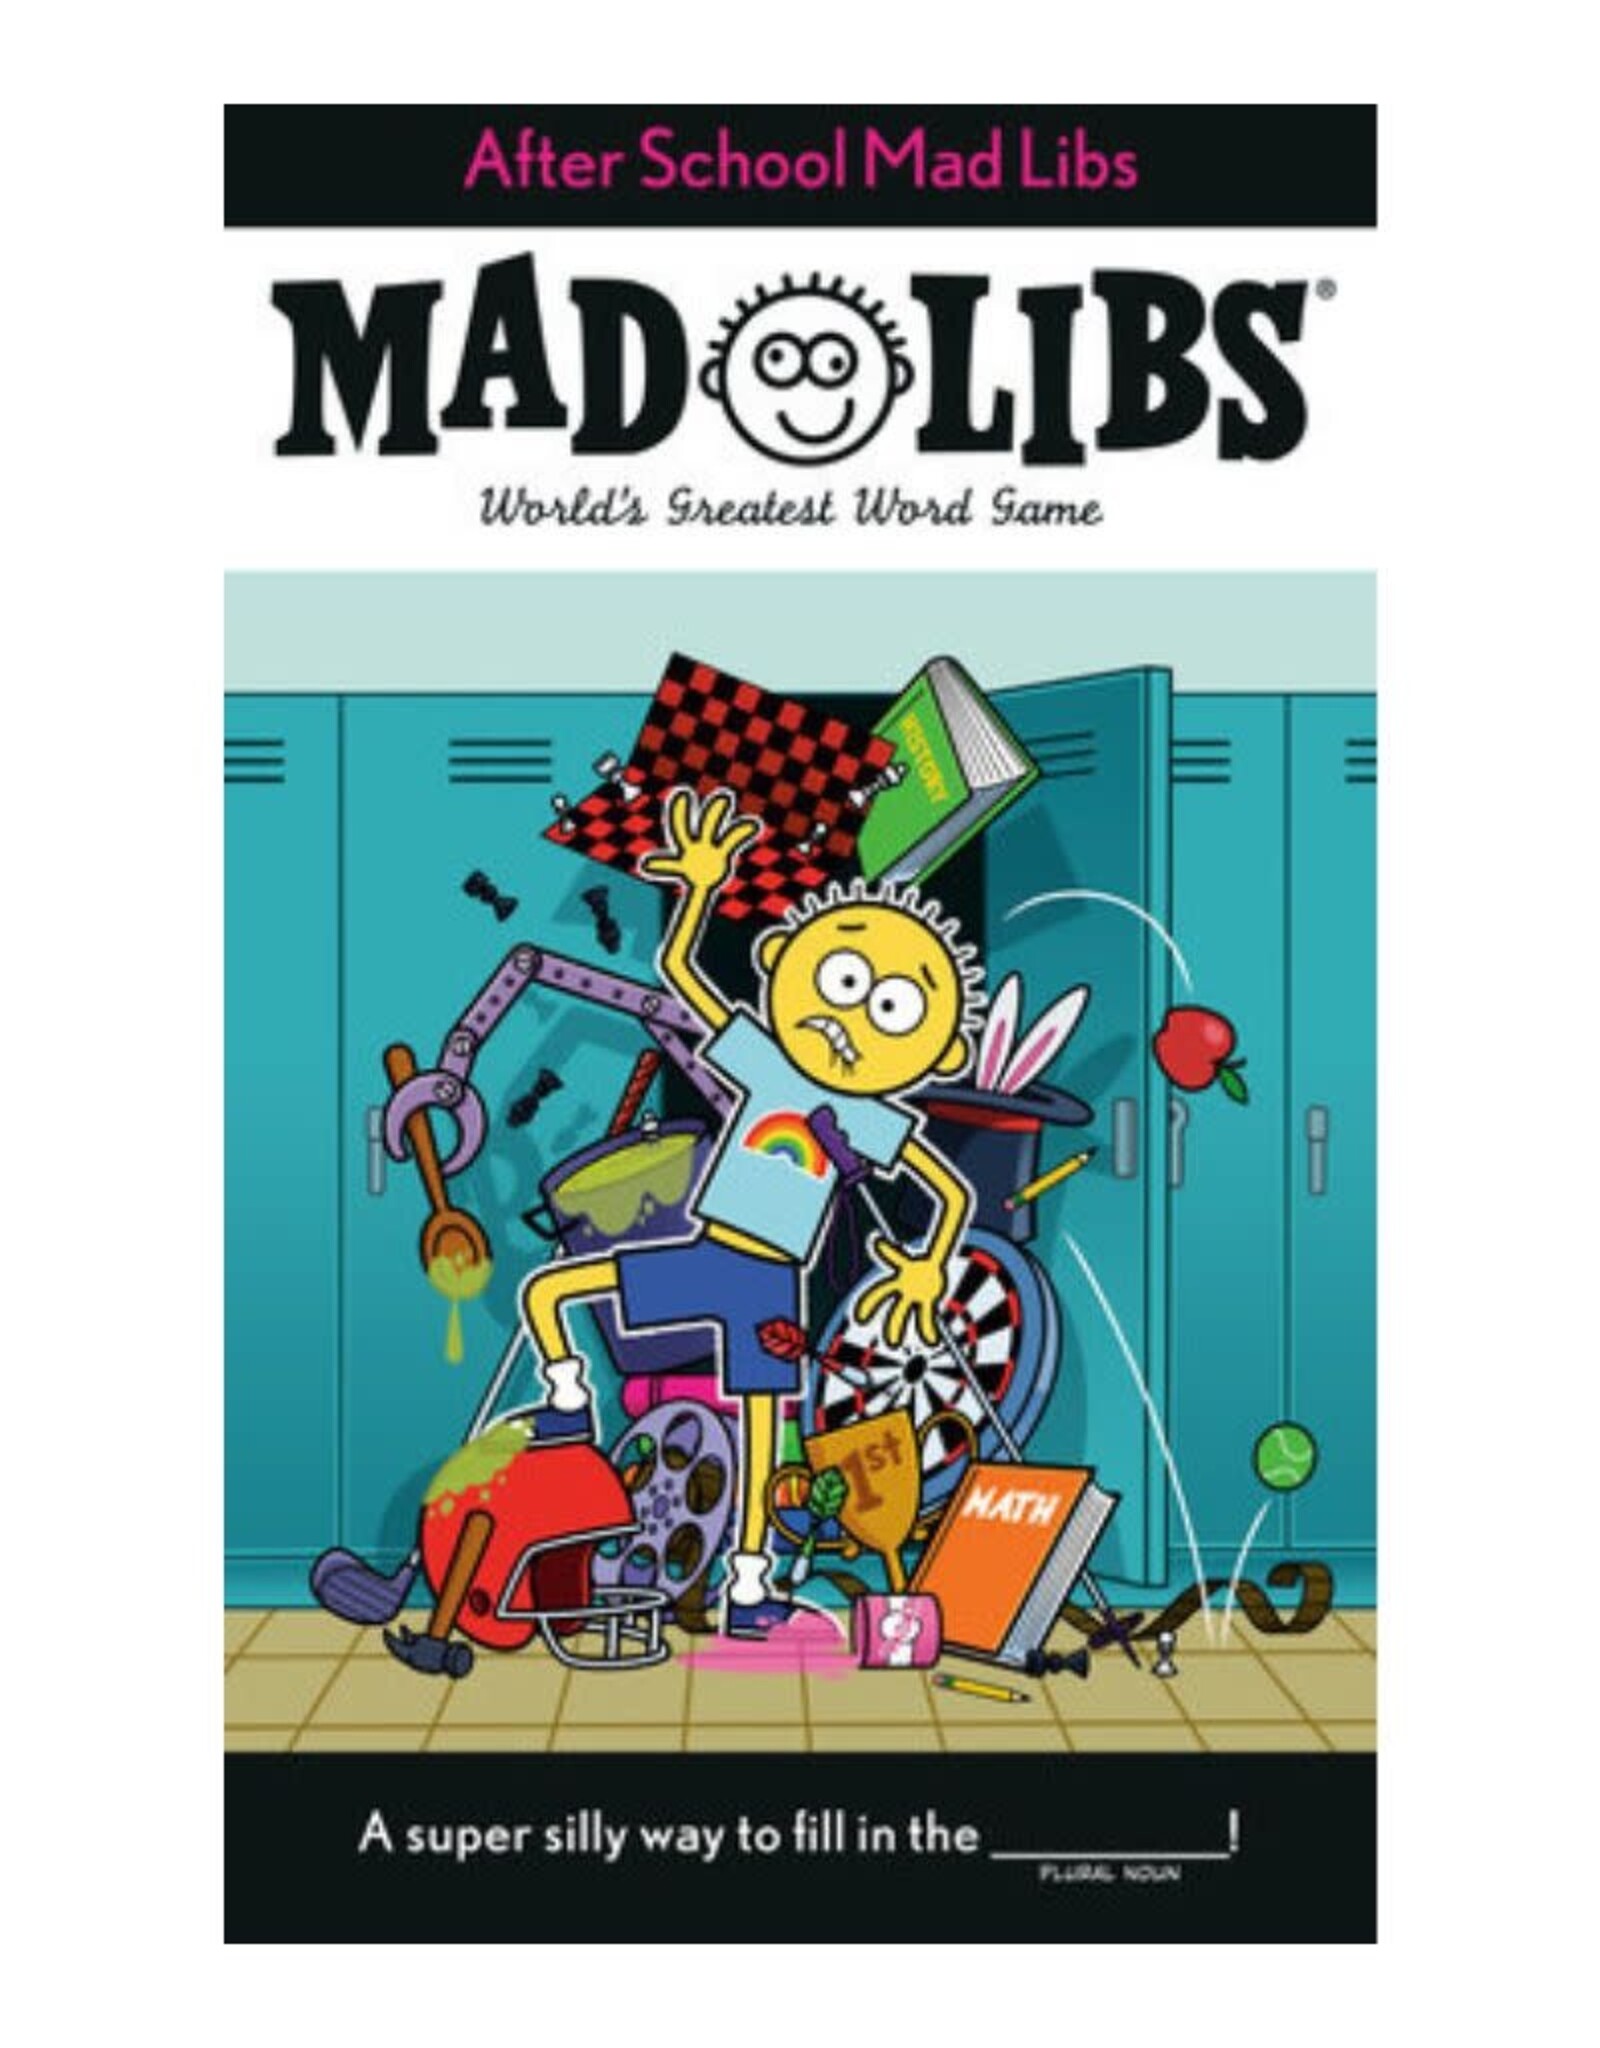 After School Mad Libs